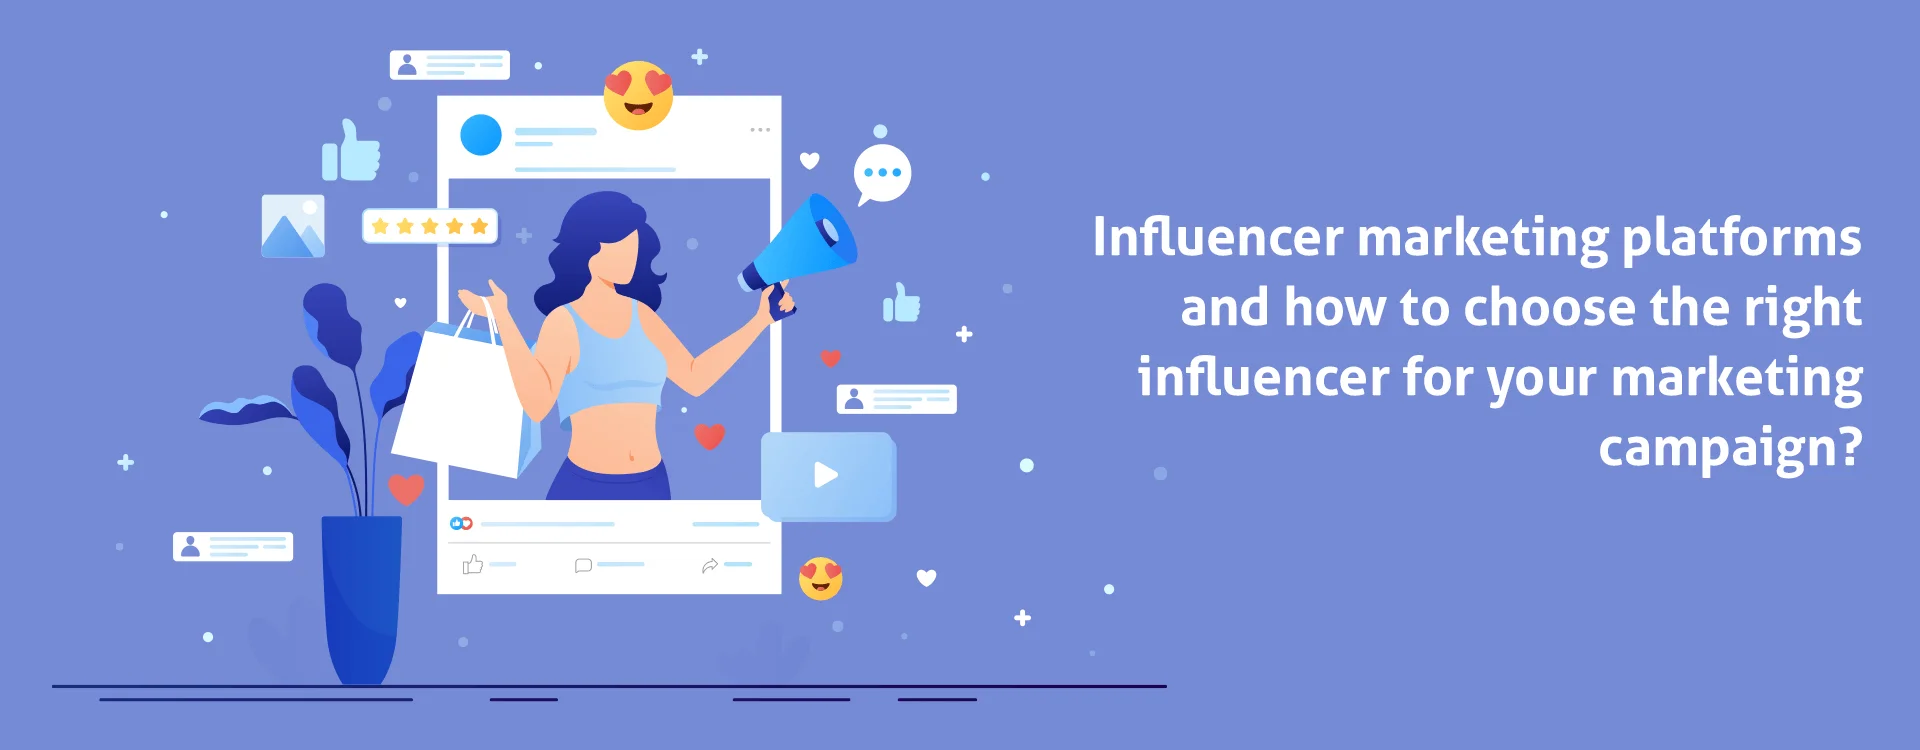 Influencer Marketing Platforms nowadays and how to choose the right influencer for your marketing campaign?